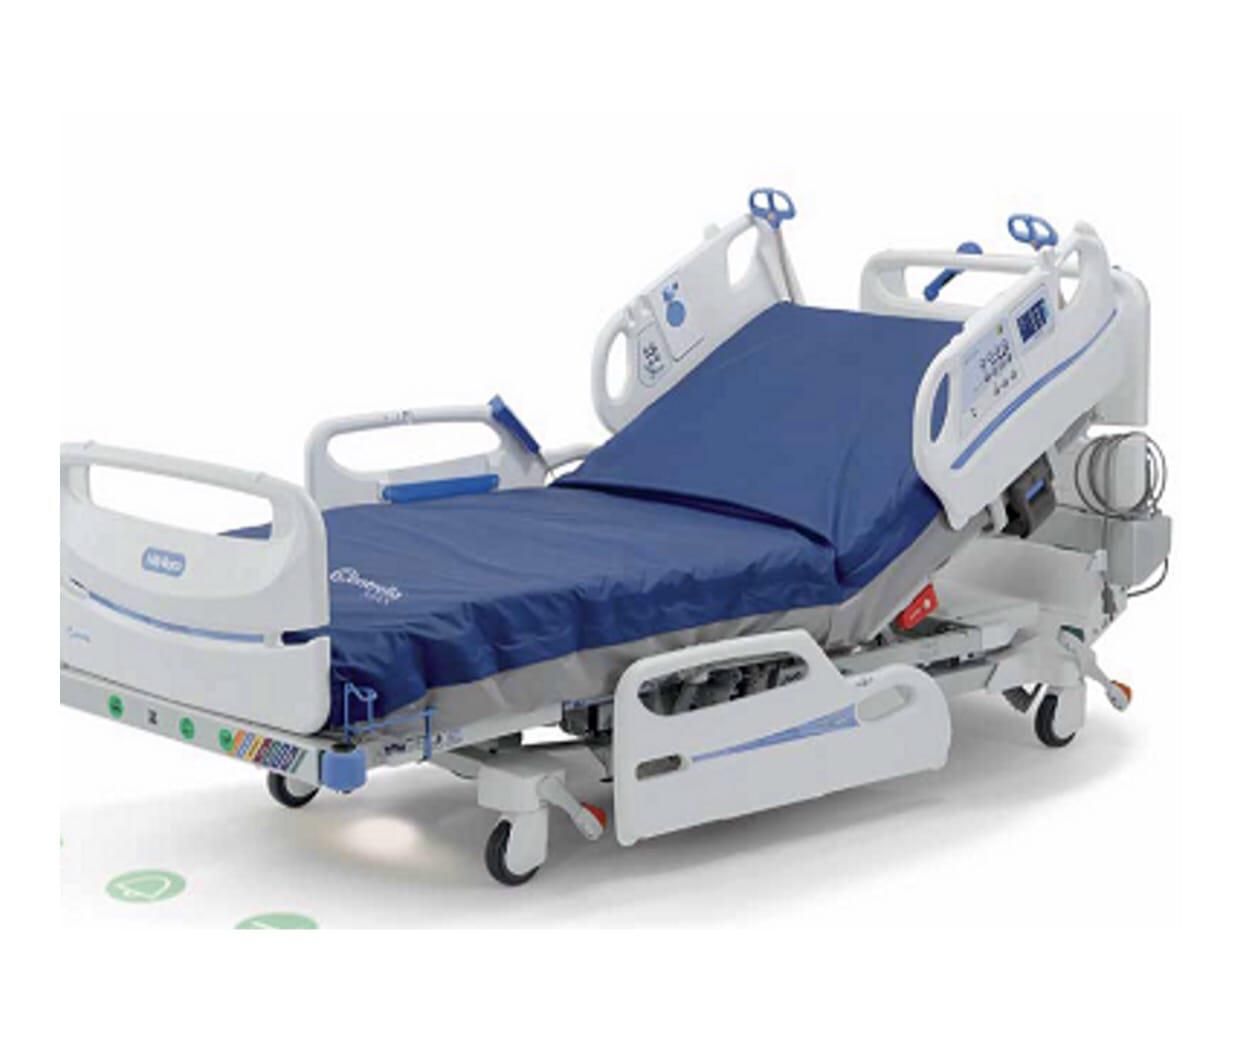 Where Can I Find the Best Hospital Bed for a Rental Home Care Patient?